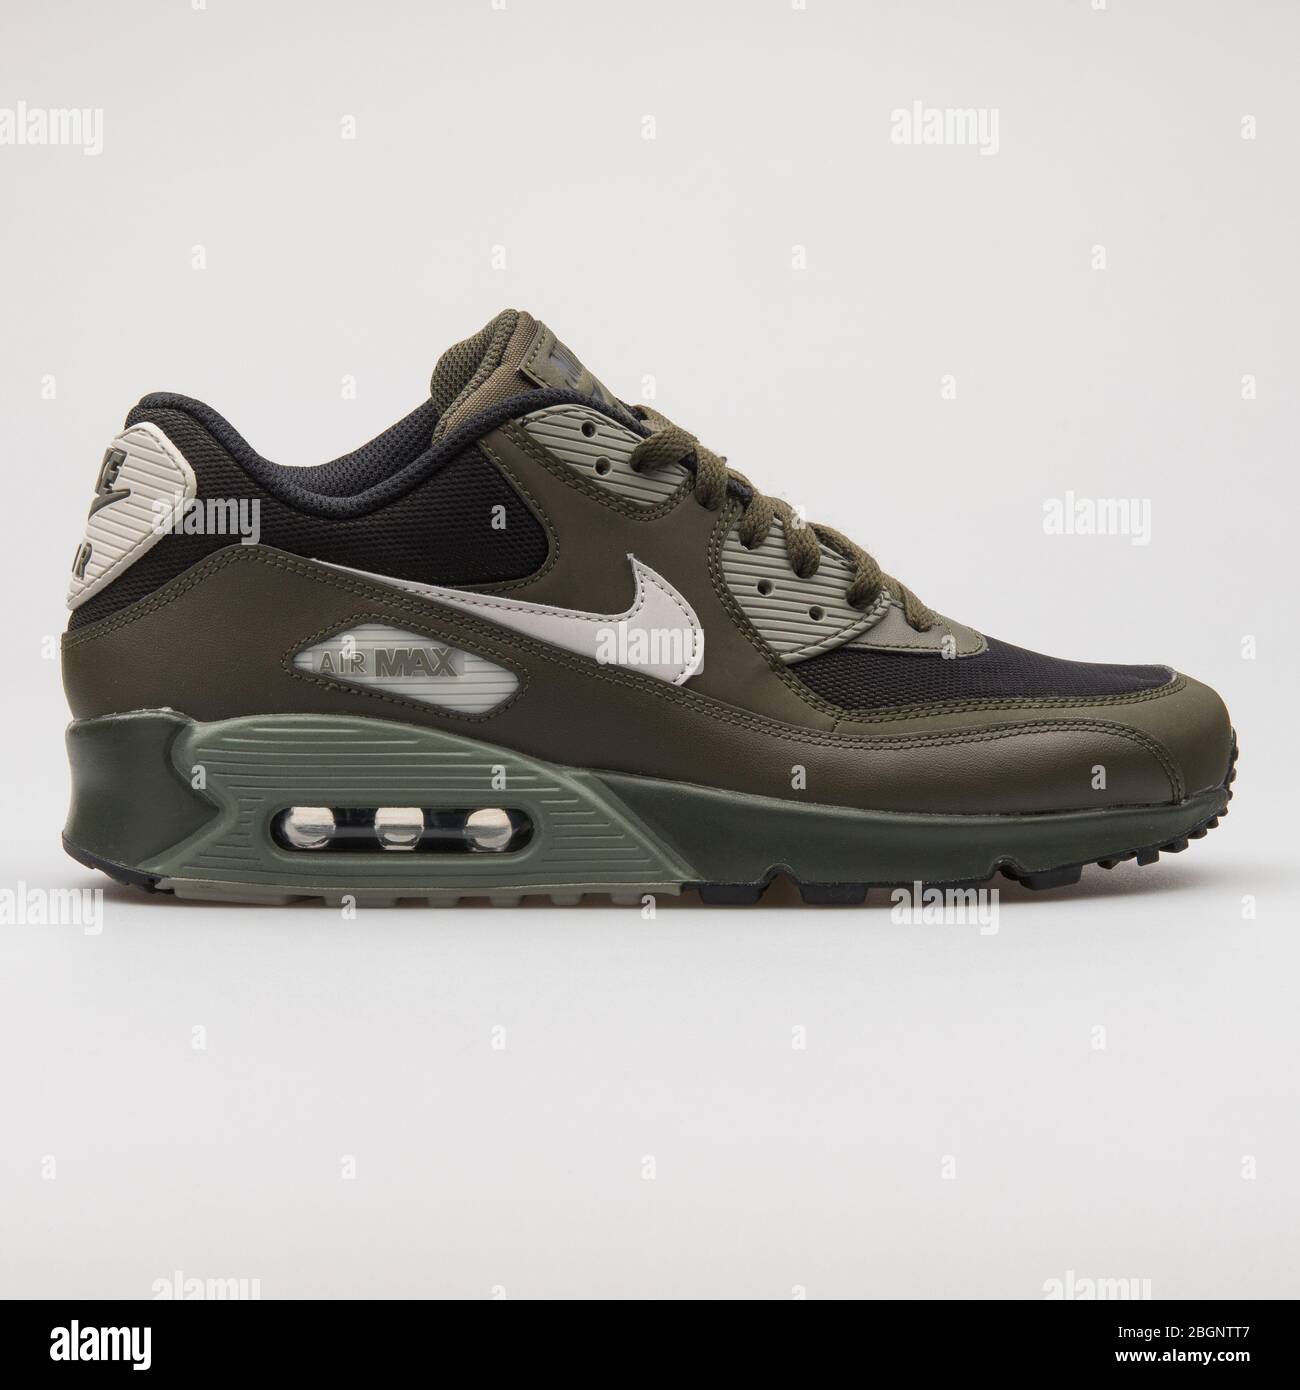 VIENNA, AUSTRIA - AUGUST 29, 2017: Nike Air Max 90 Premium olive green and  black sneaker on white background Stock Photo - Alamy